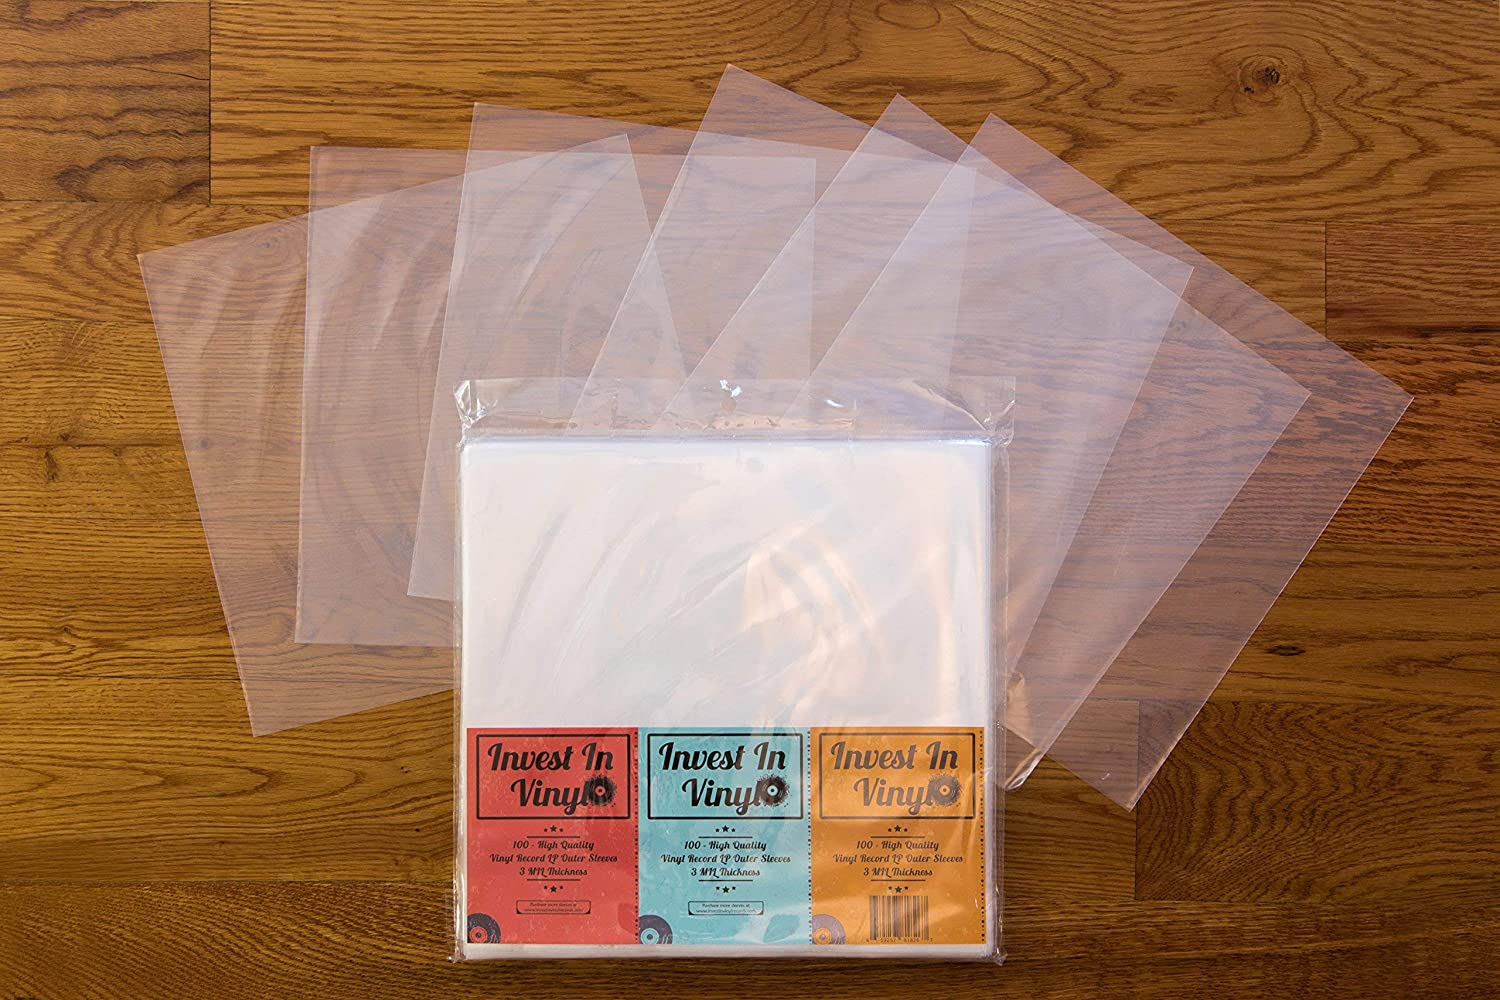 Best Outer Record Sleeves for Maximum Protection - Sound Matters